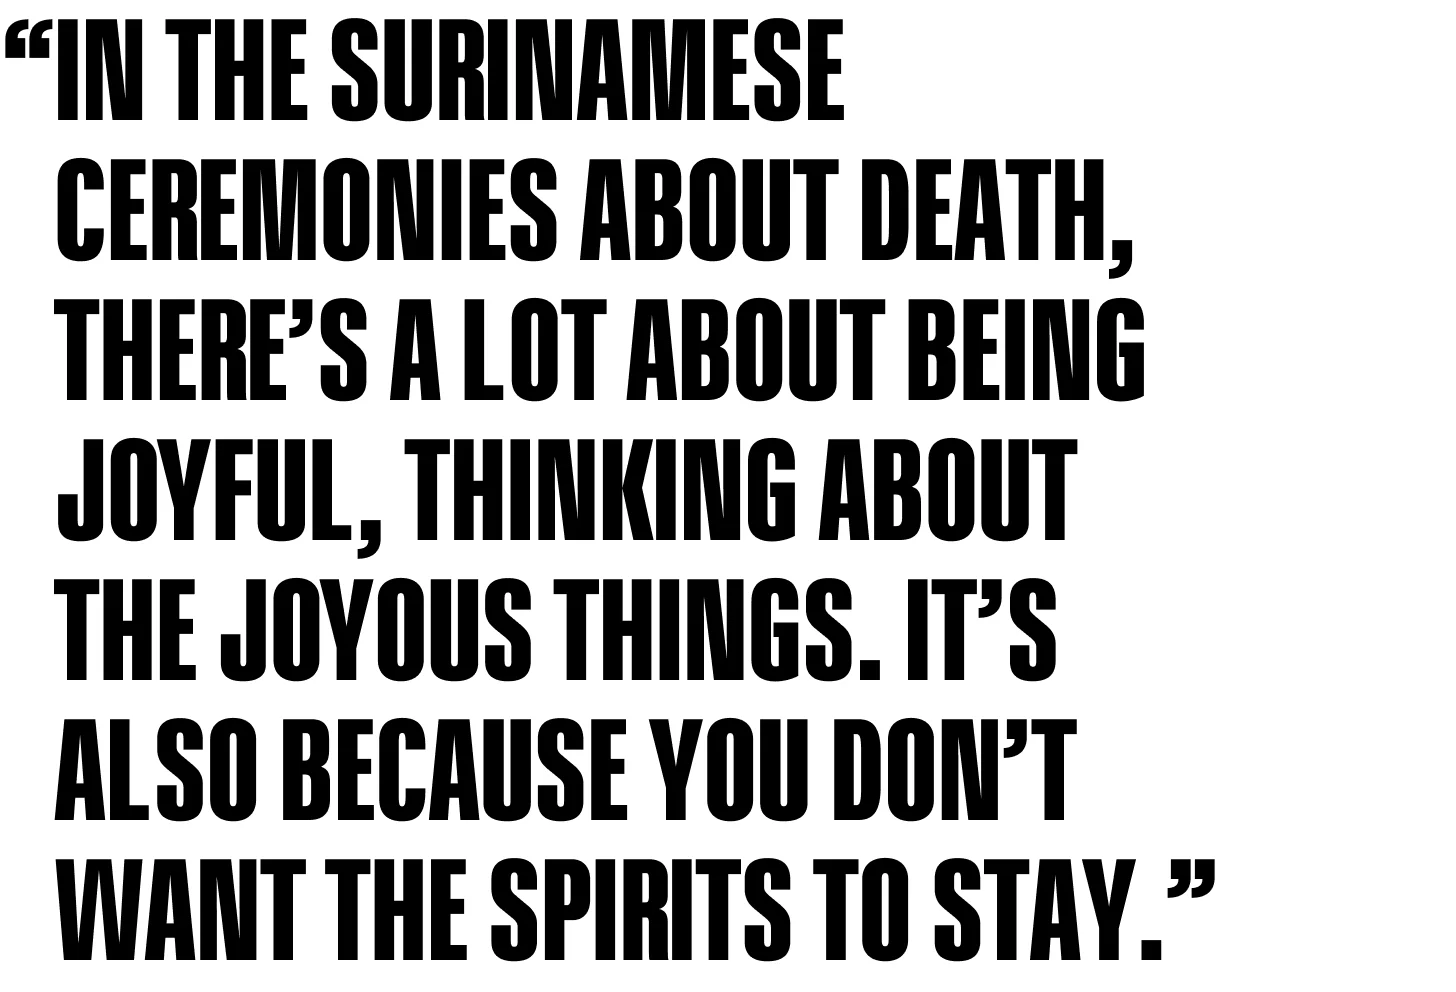 In the Surinamese ceremonies about death, there’s a lot about being joyful, thinking about the joyous things. It’s also because you don’t want the spirits to stay.